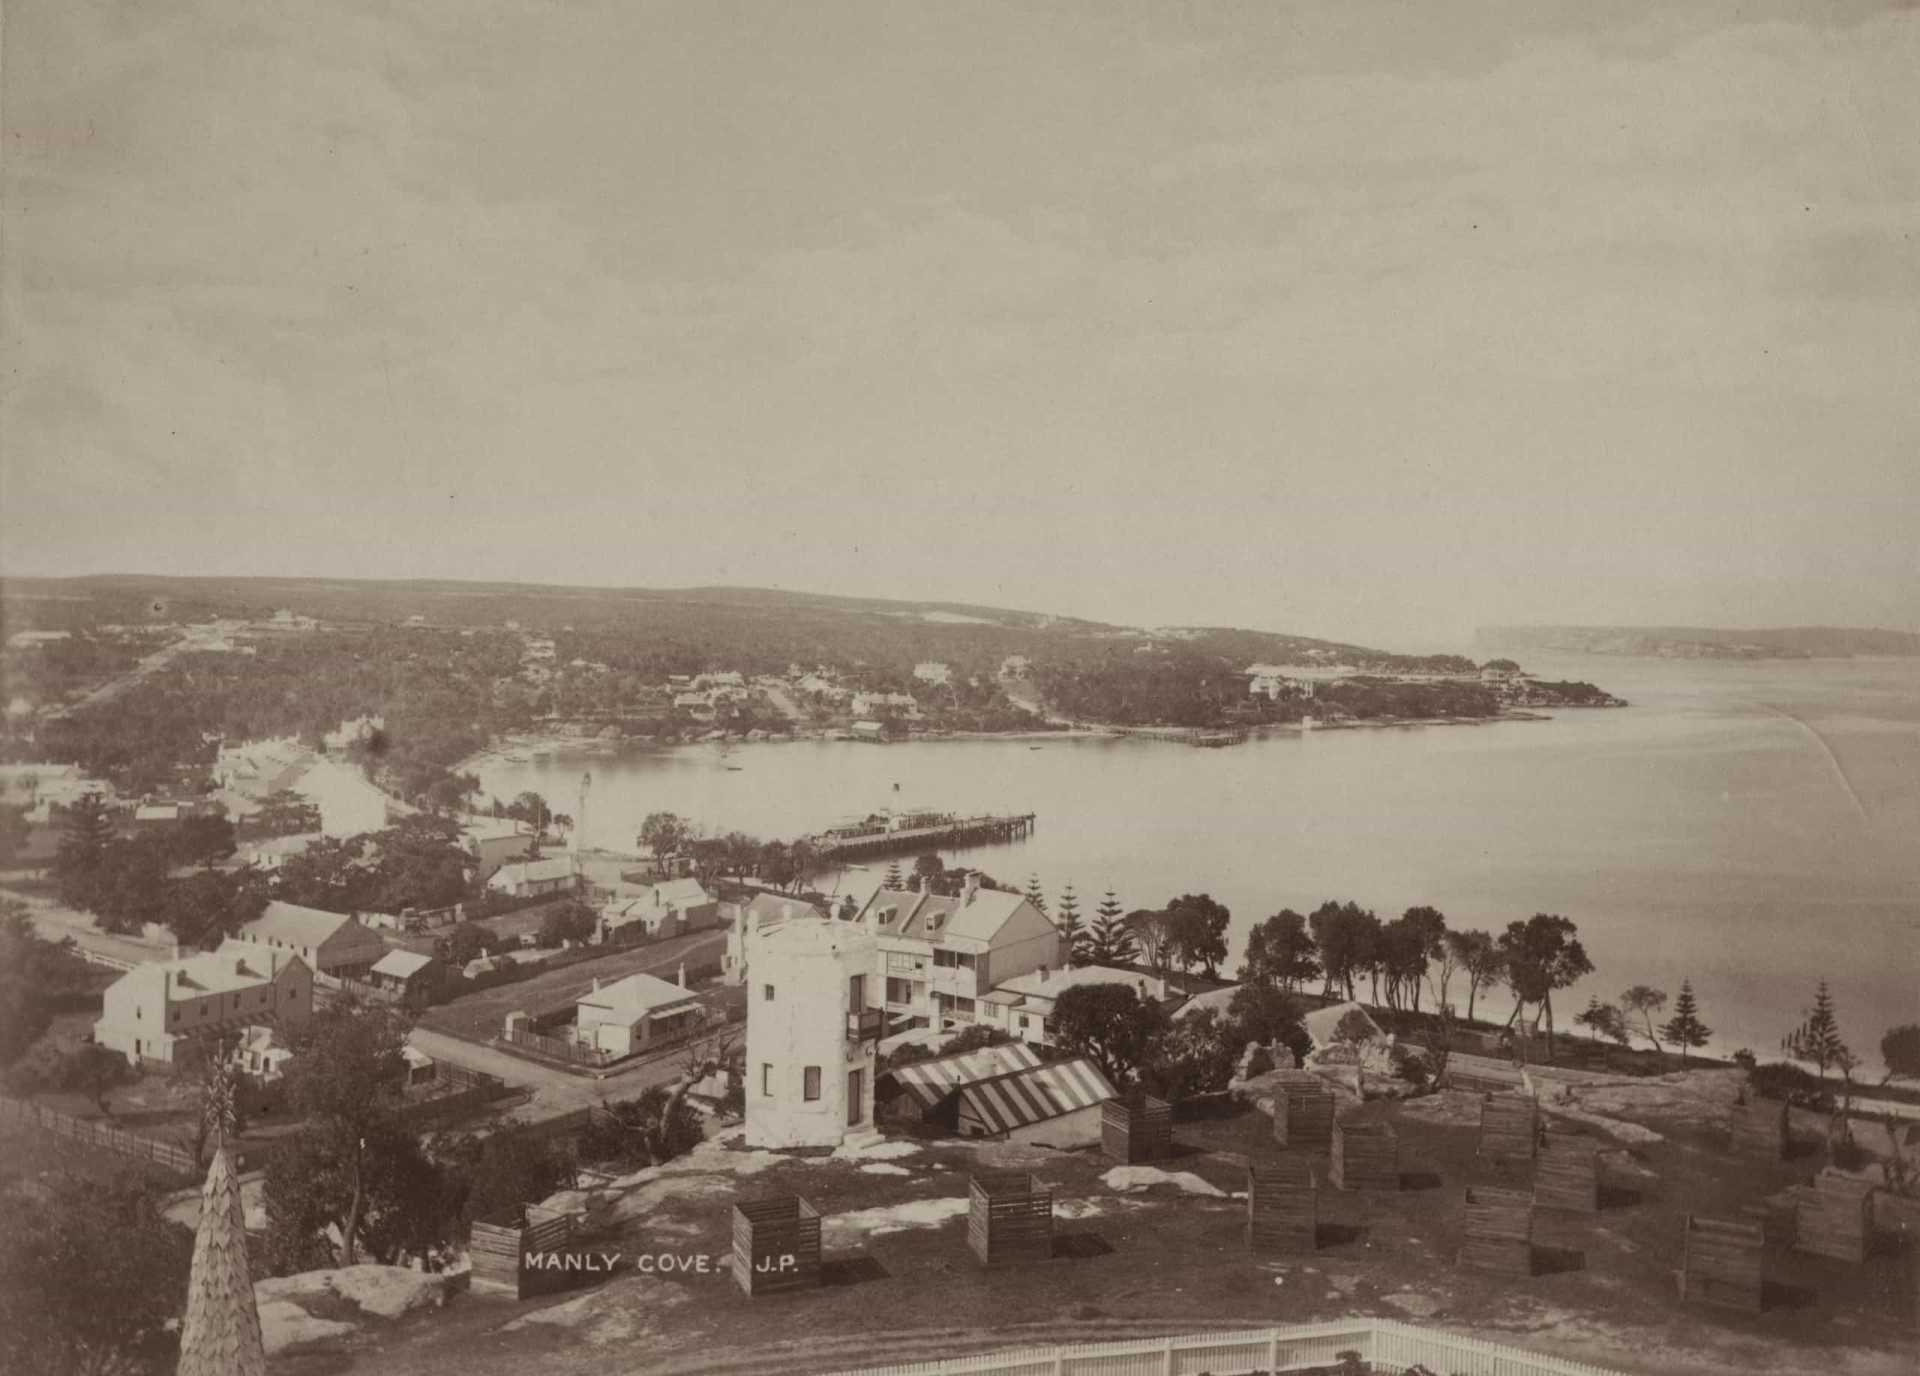 An early look at Manly, a beachside suburb in the Australian city. Photo taken circa 1880.<p>You may also like:<a href="https://www.starsinsider.com/n/467863?utm_source=msn.com&utm_medium=display&utm_campaign=referral_description&utm_content=397441v1en-us"> Log cabins you'll want to move into</a></p>